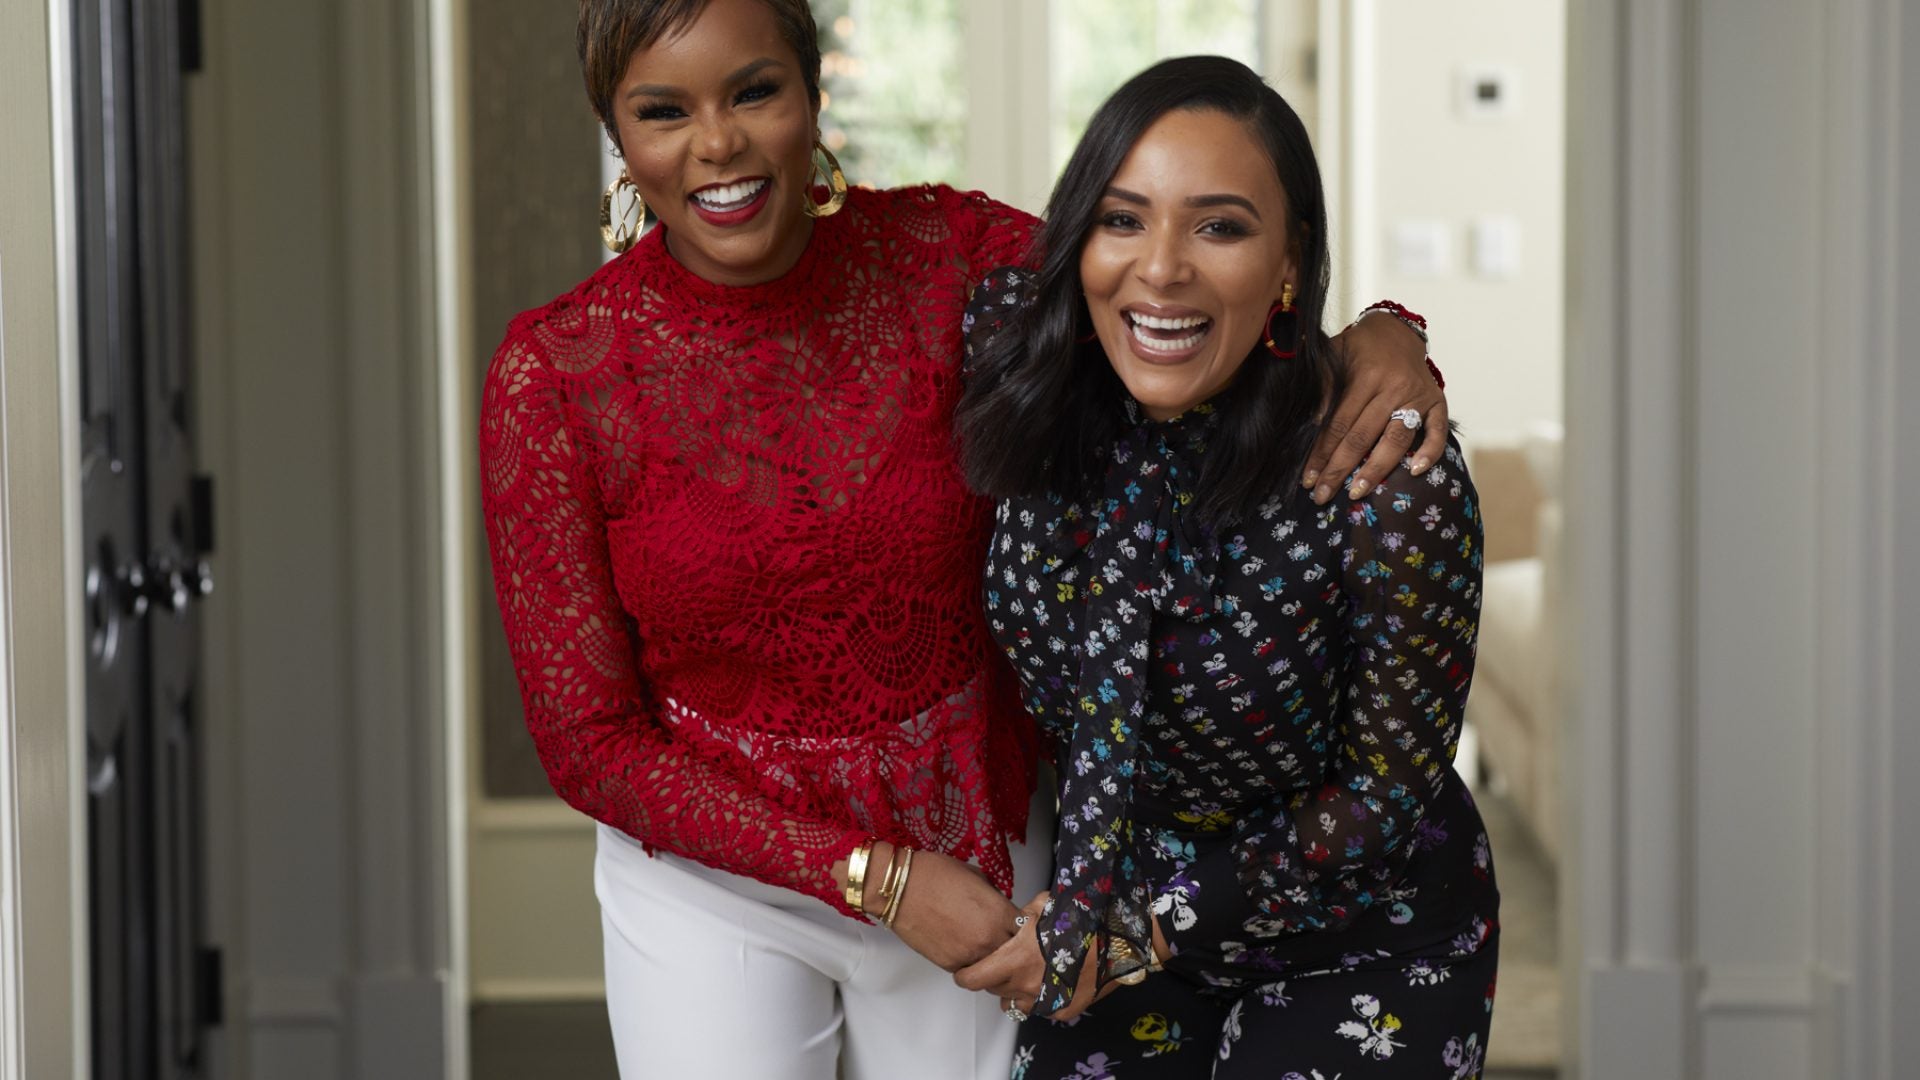 Eudoxie Bridges, LeToya Luckett and Keri Hilson Talk Lessons in Love and Friendship